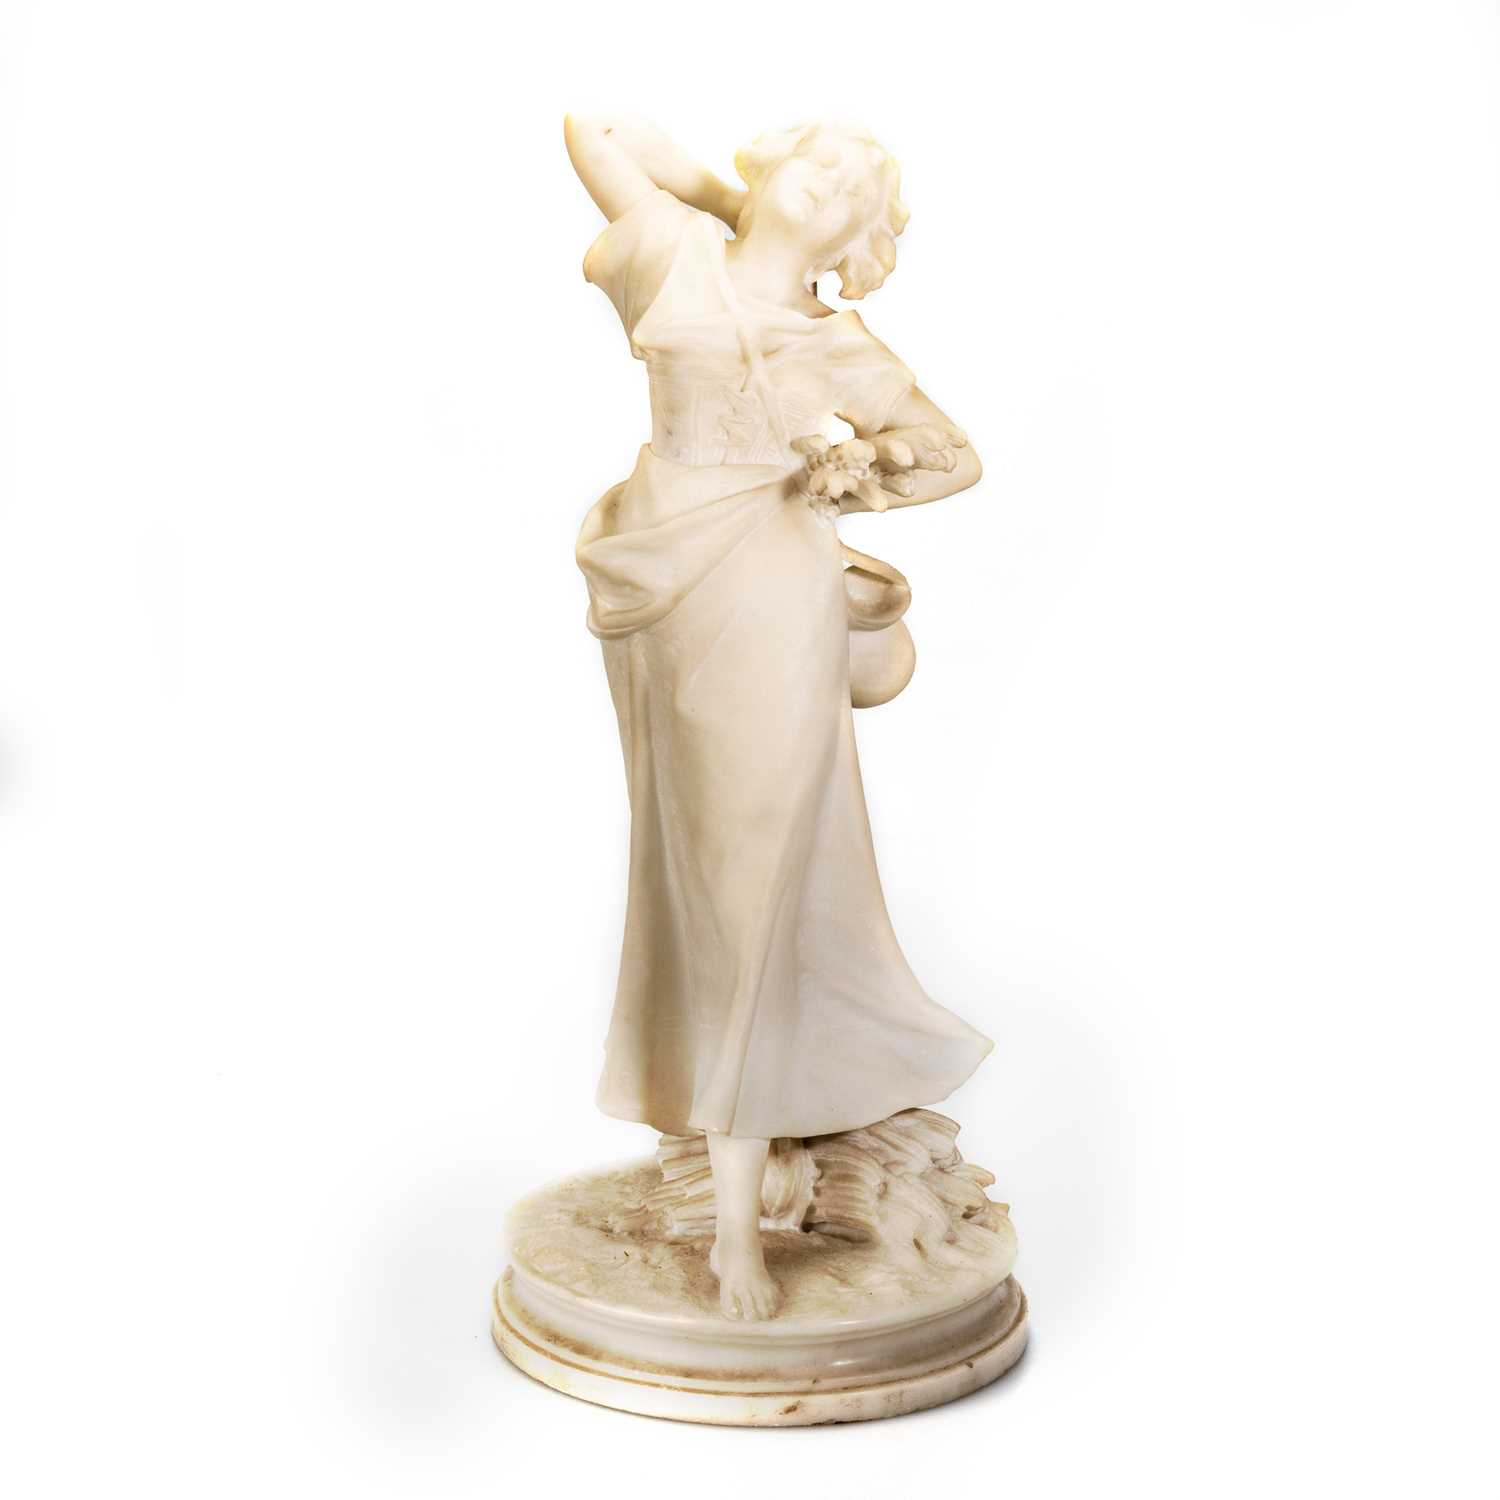 19TH CENTURY EUROPEAN SCHOOL MARBLE SCULPTURE OF A GIRL HOLDING WHEAT SHEAVES